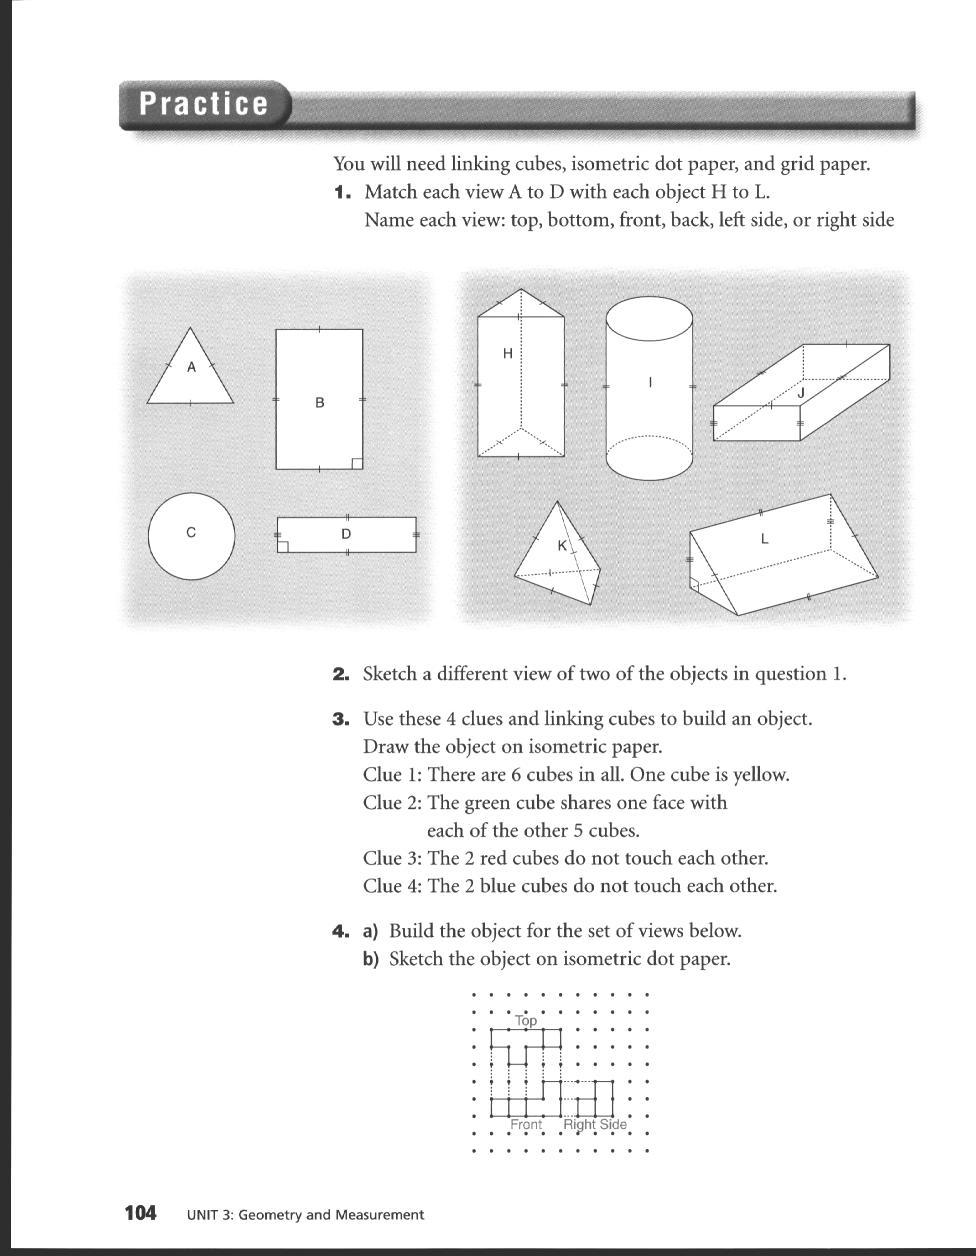 Practice..:,. --.--..."I- ' 1 '.i^a1-!1 ".' -m You will need linking cubes, isometric dot paper, and grid paper. 1. Match each view A to D with each object H to L.